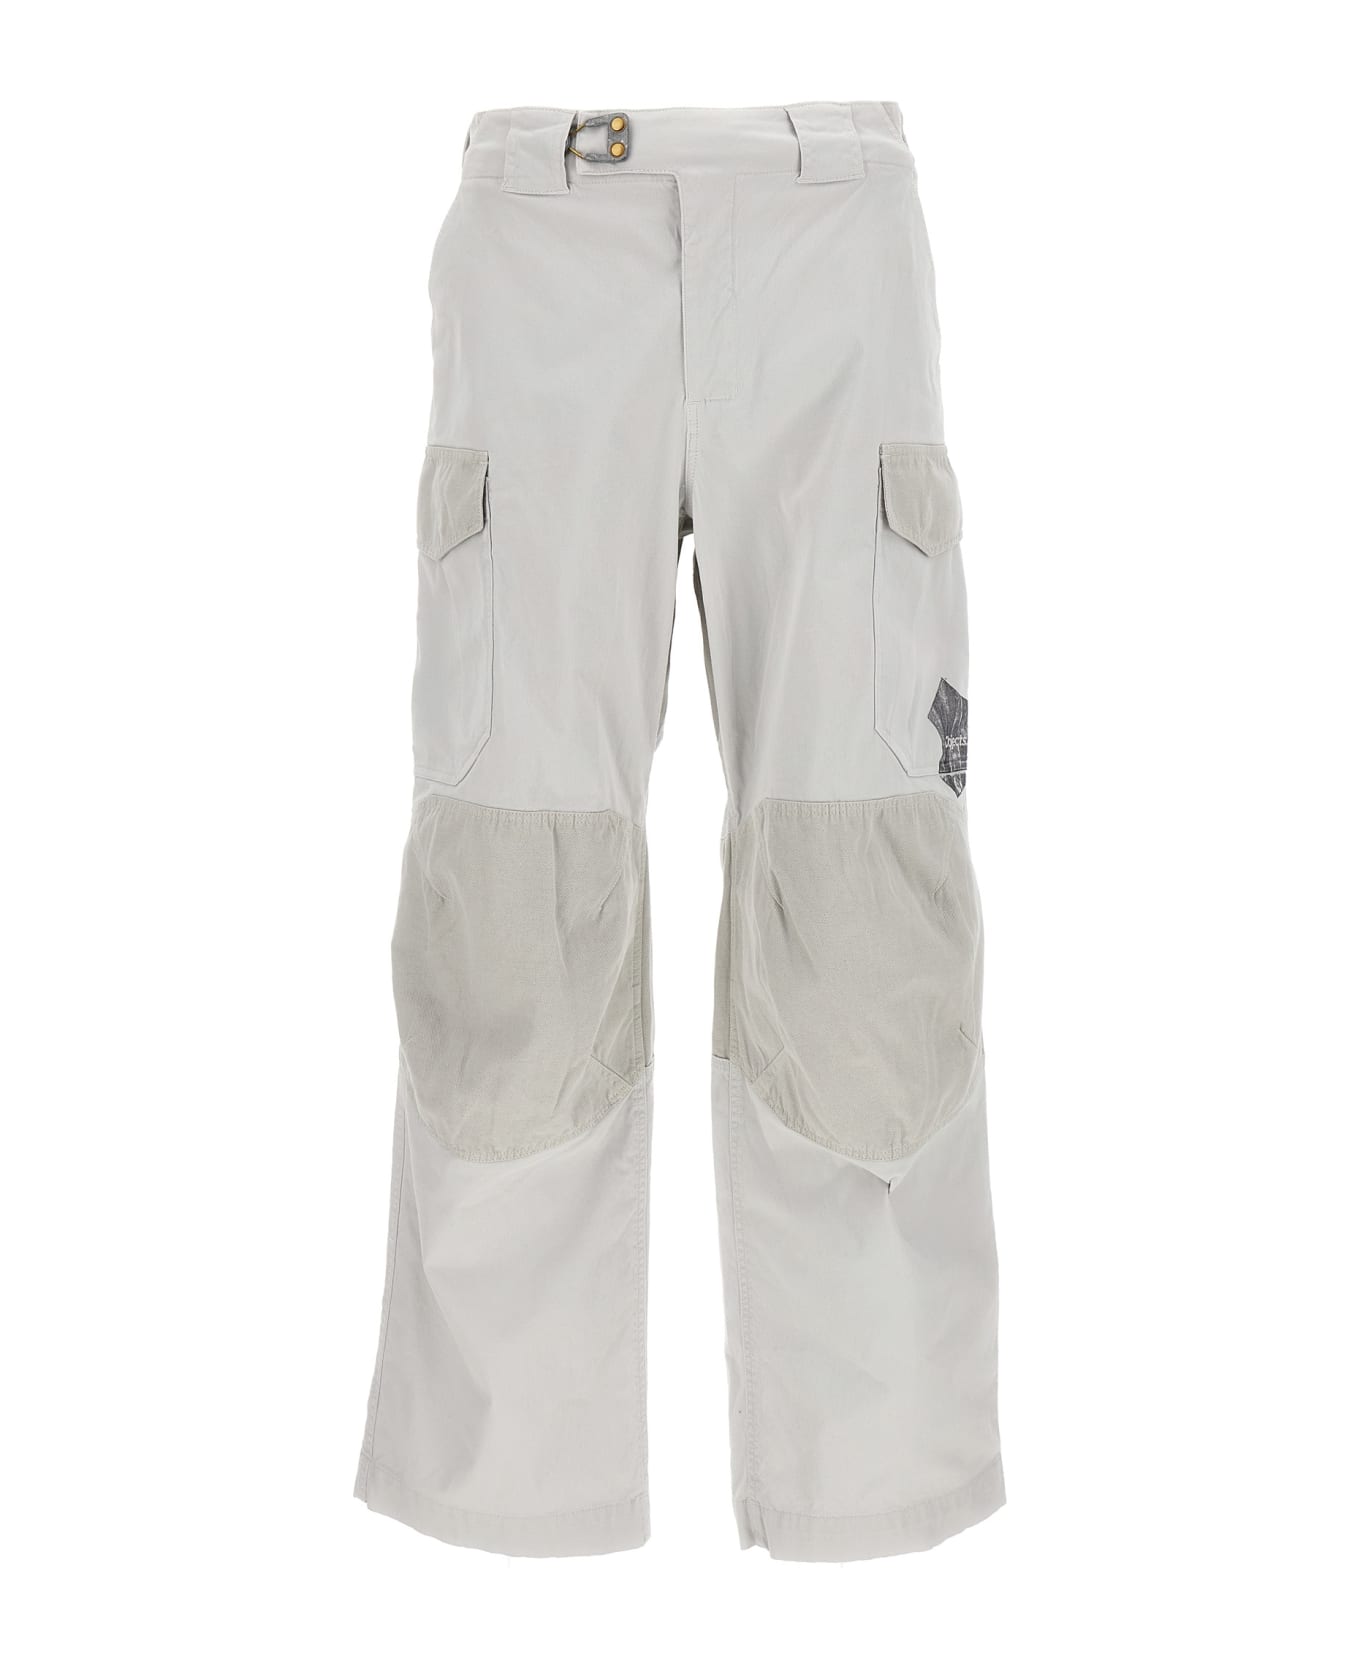 Objects Iv Life Cargo Pants - Gray ボトムス